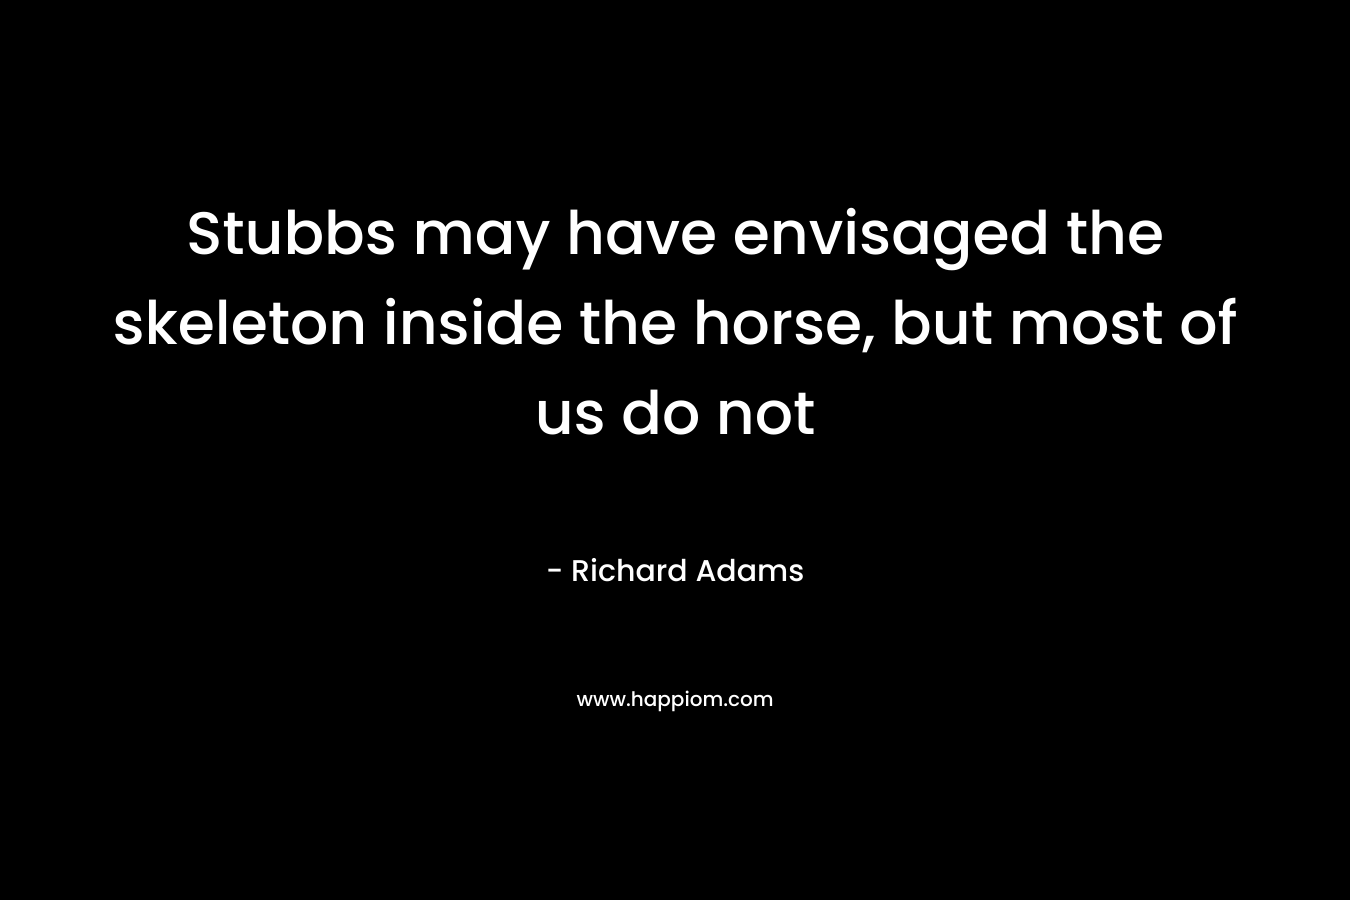 Stubbs may have envisaged the skeleton inside the horse, but most of us do not – Richard Adams